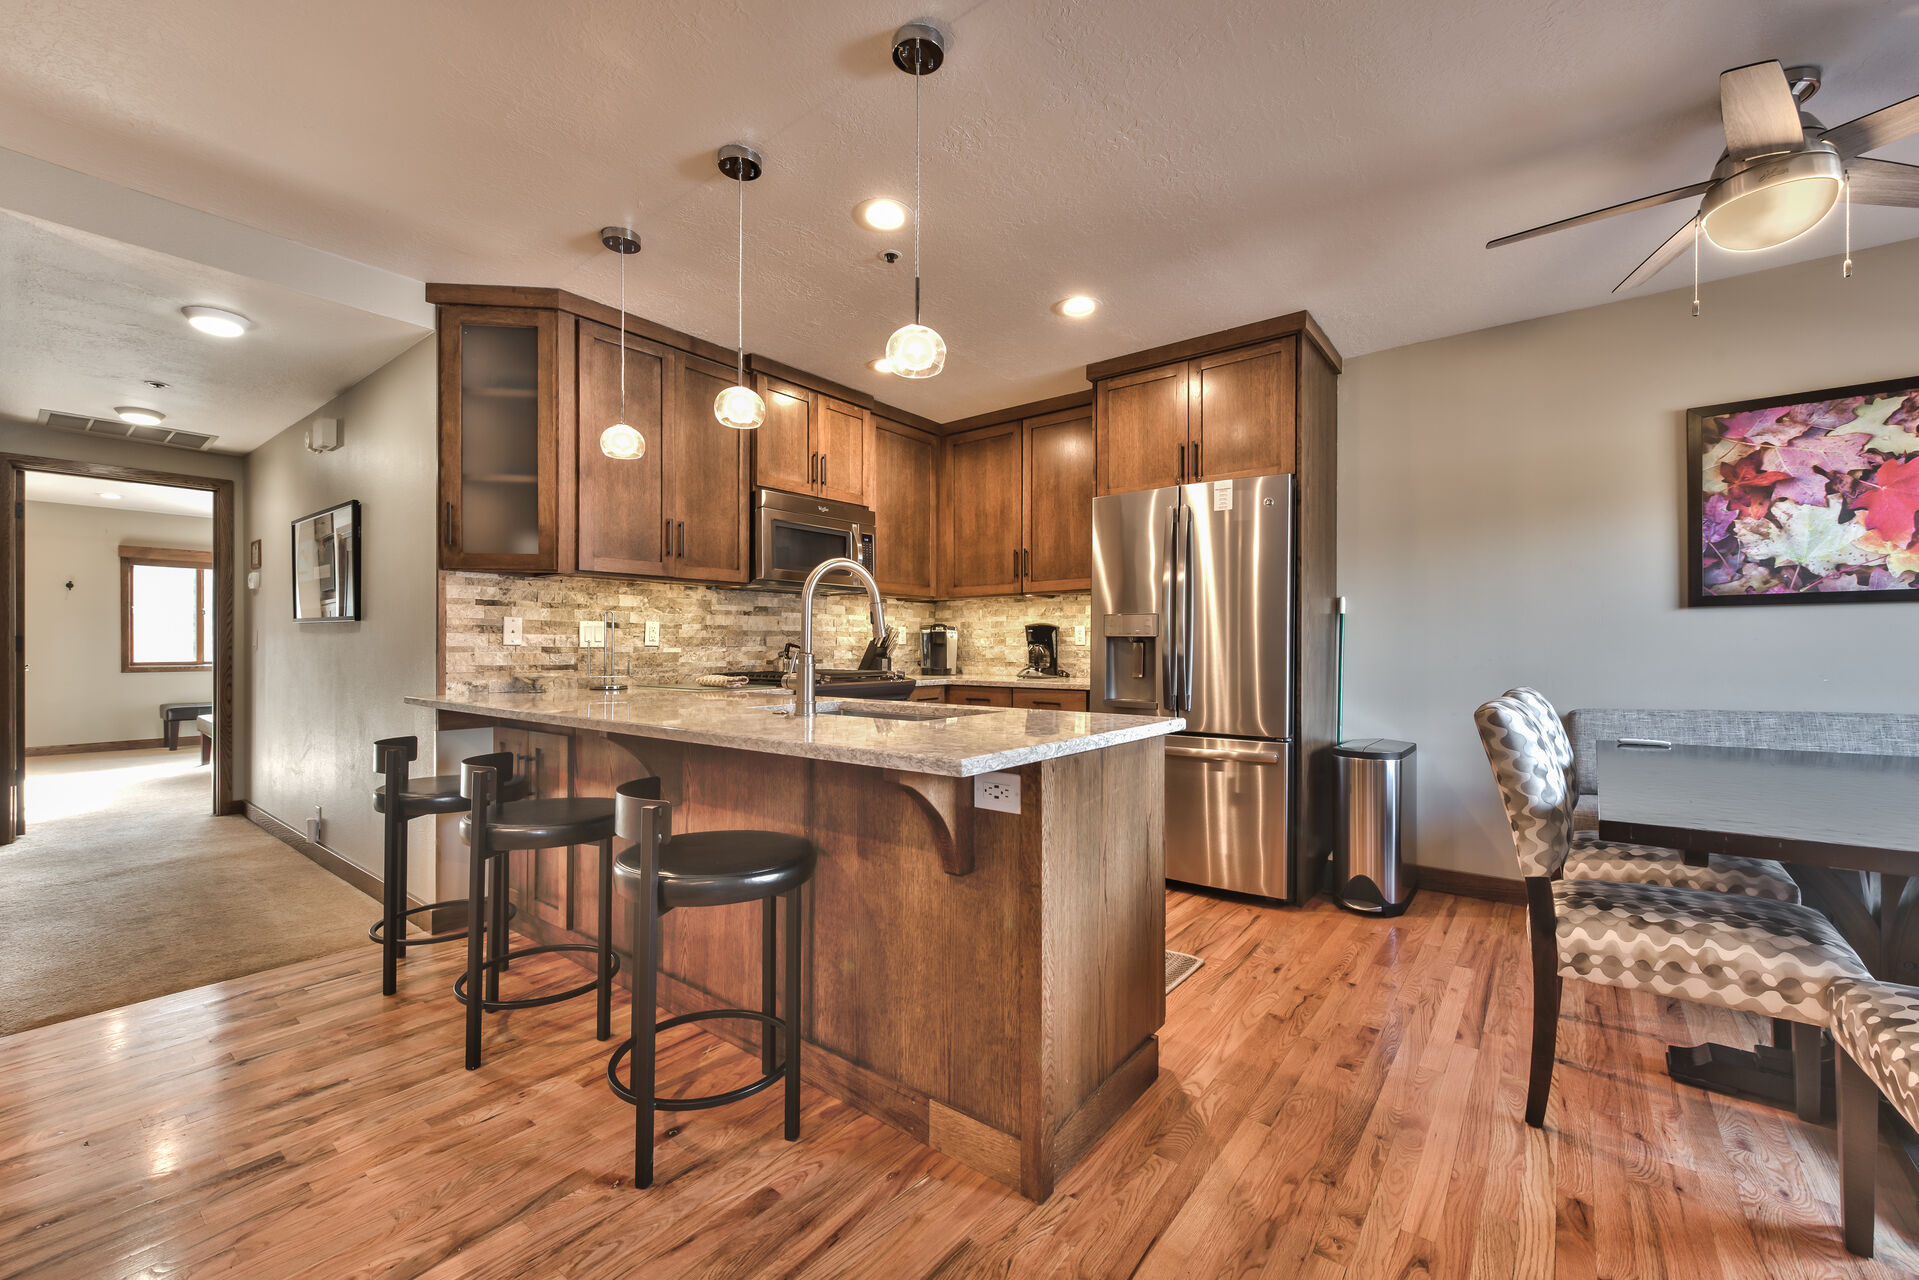 Kitchen and Dining Area with Hardwood Floors